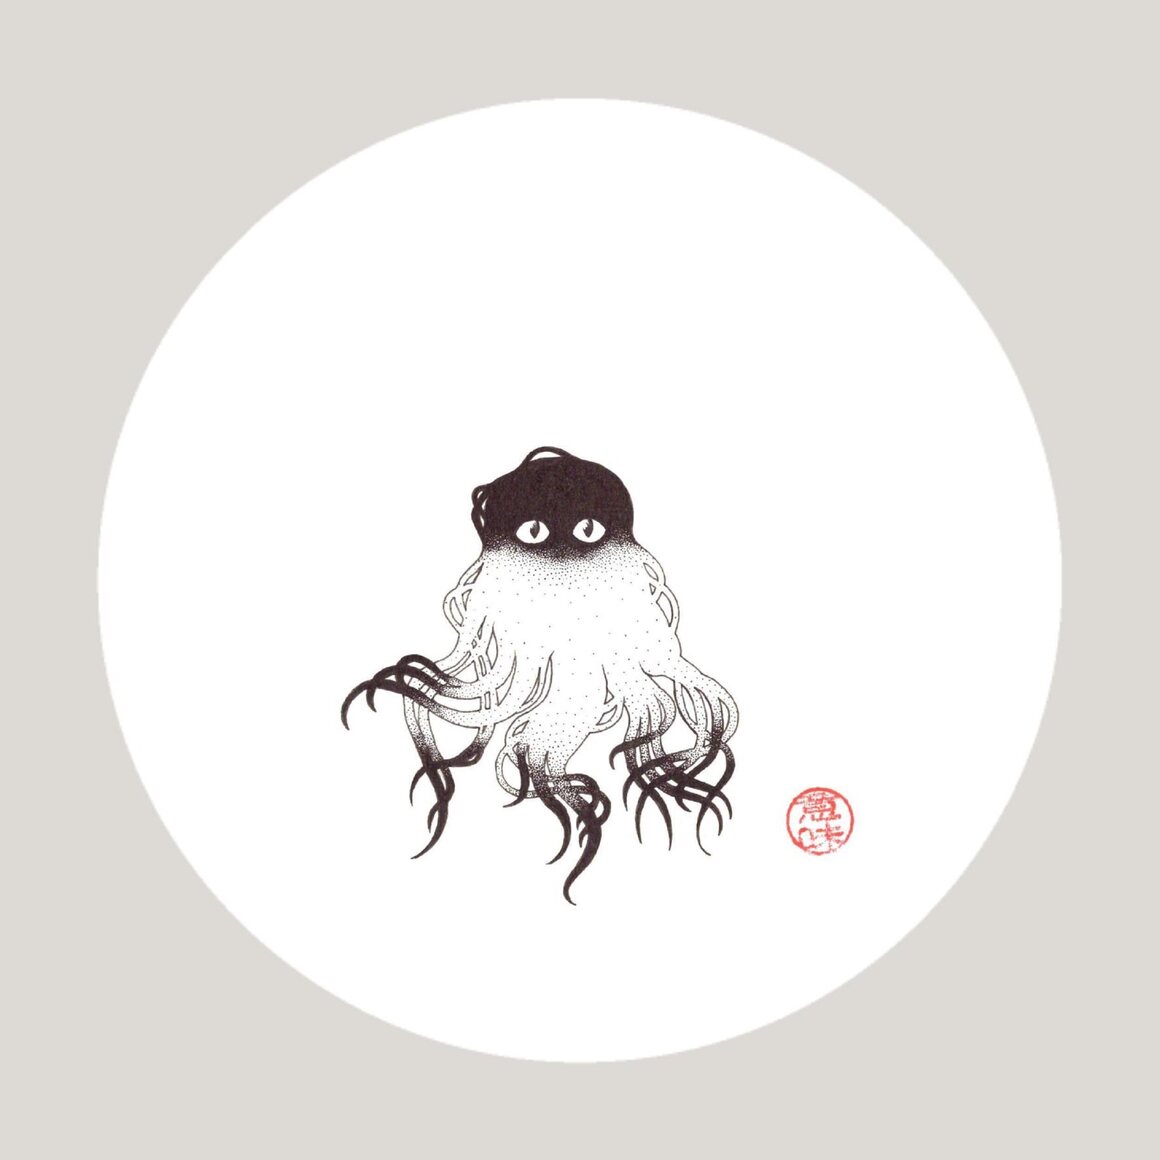 A Keukegen, which featured in the Japanese 18th century beastiary <em>Konjaku Hyakki Shūi</em>, is a small creature covered in long hair that causes sickness. 